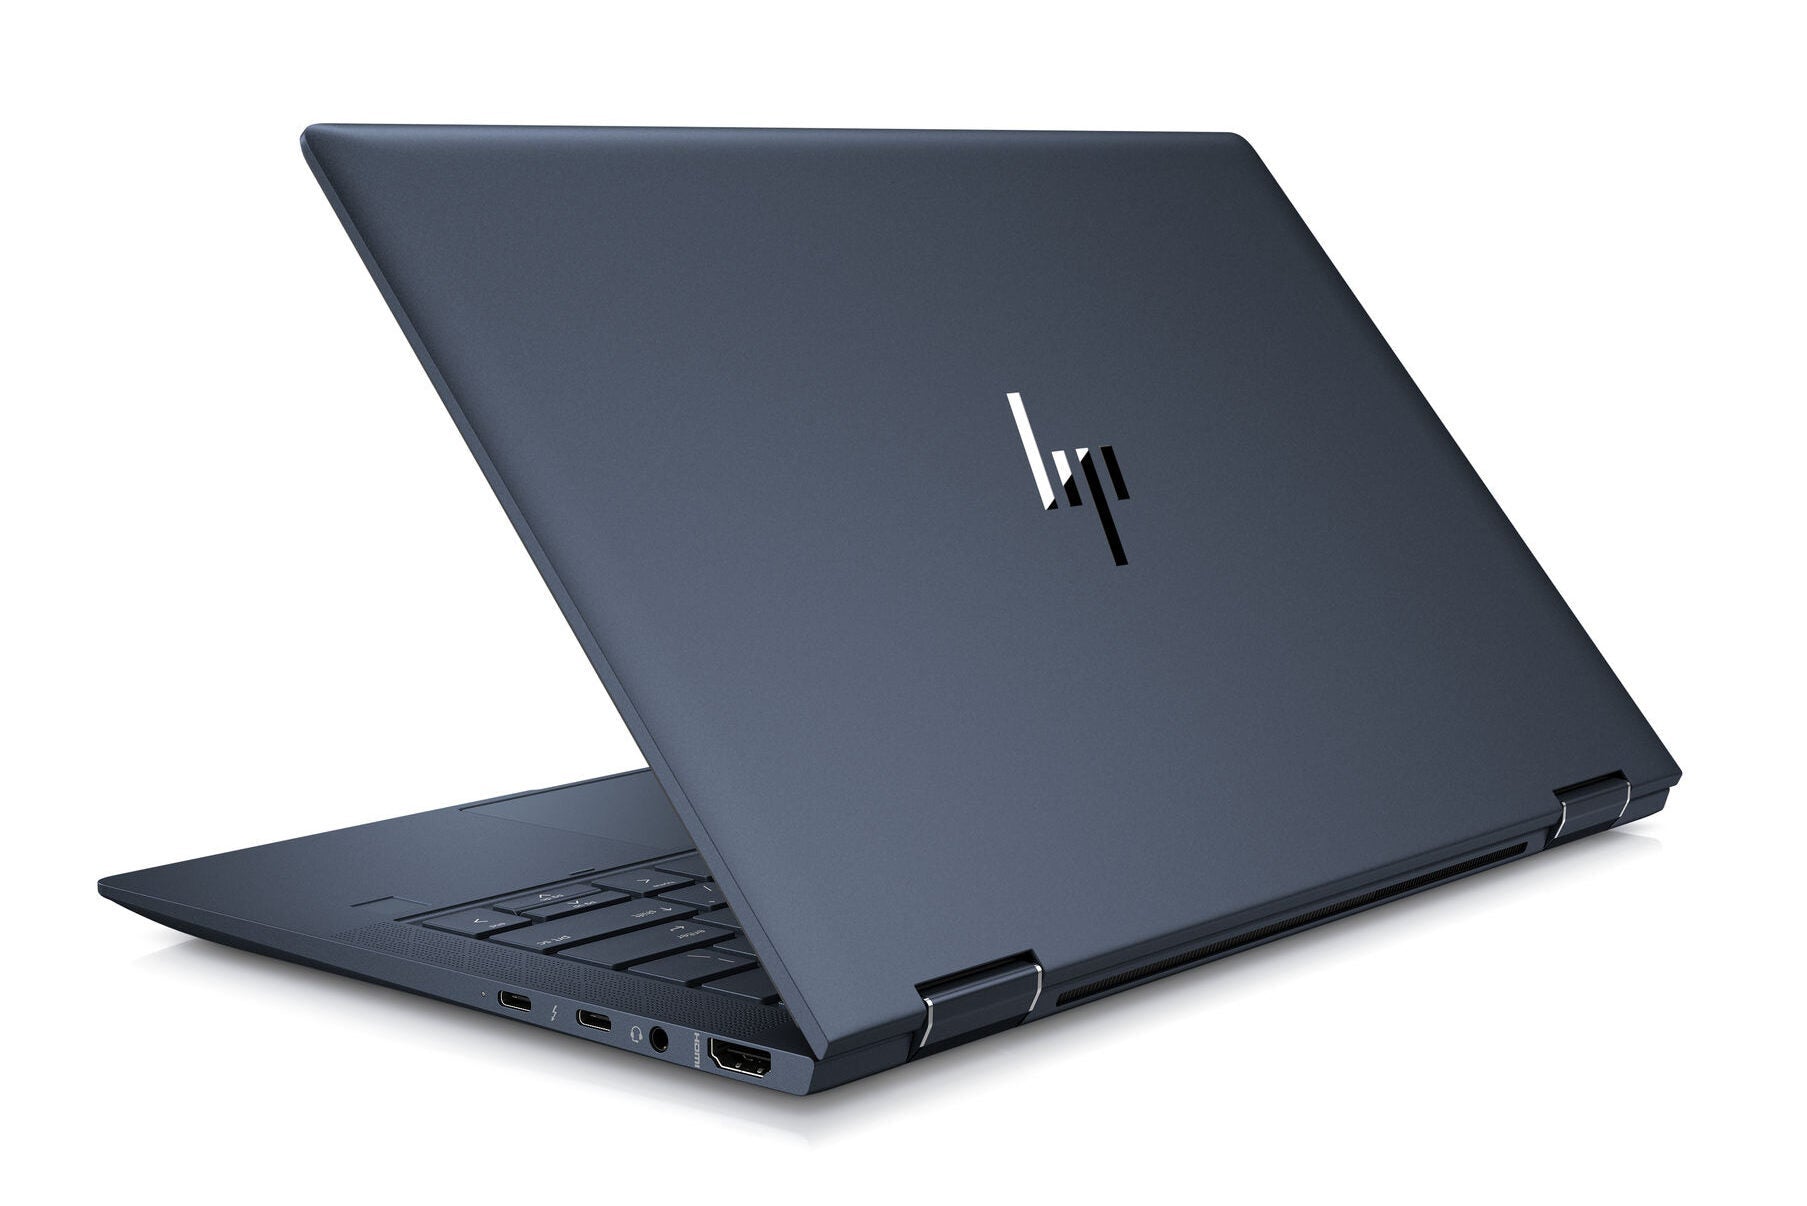 HP Notebook | WINPROMY CONSULTANCY SDN BHD. (1065242-V) All Rights Reserved.